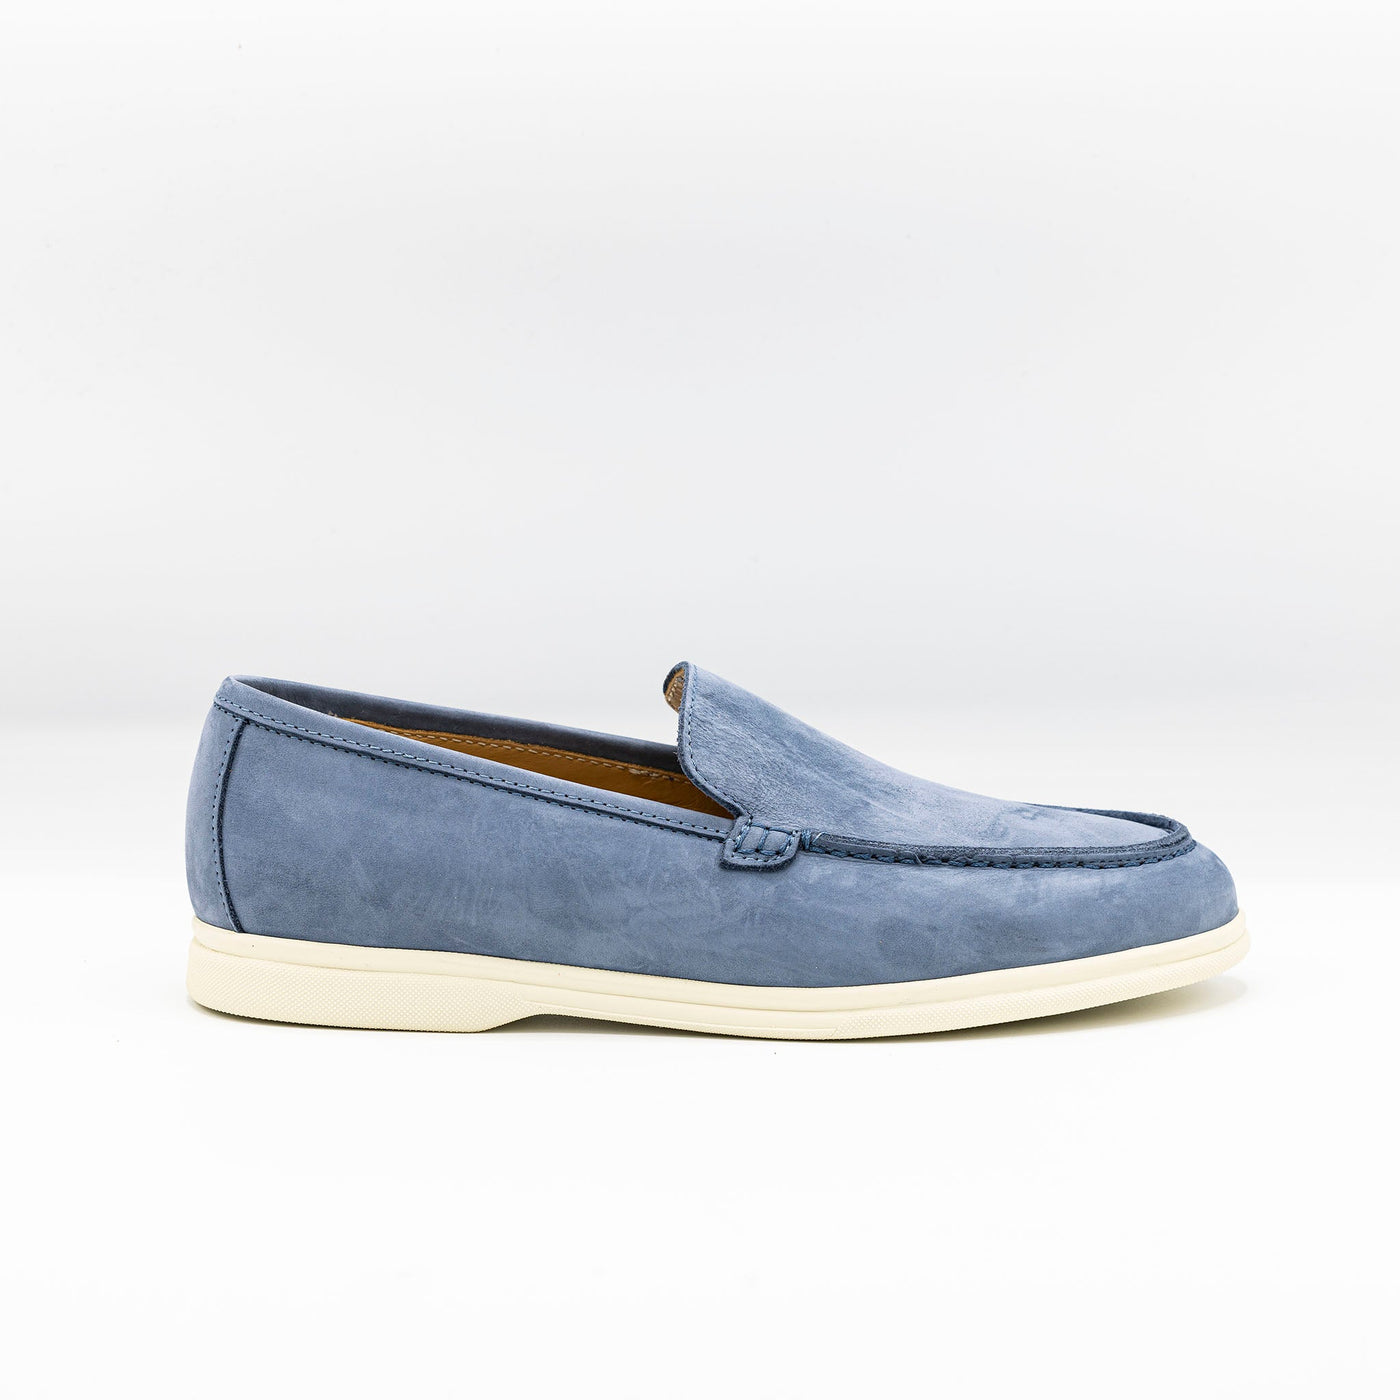 THE MINIMAL MOCCASINS in BLUE NUBUCK